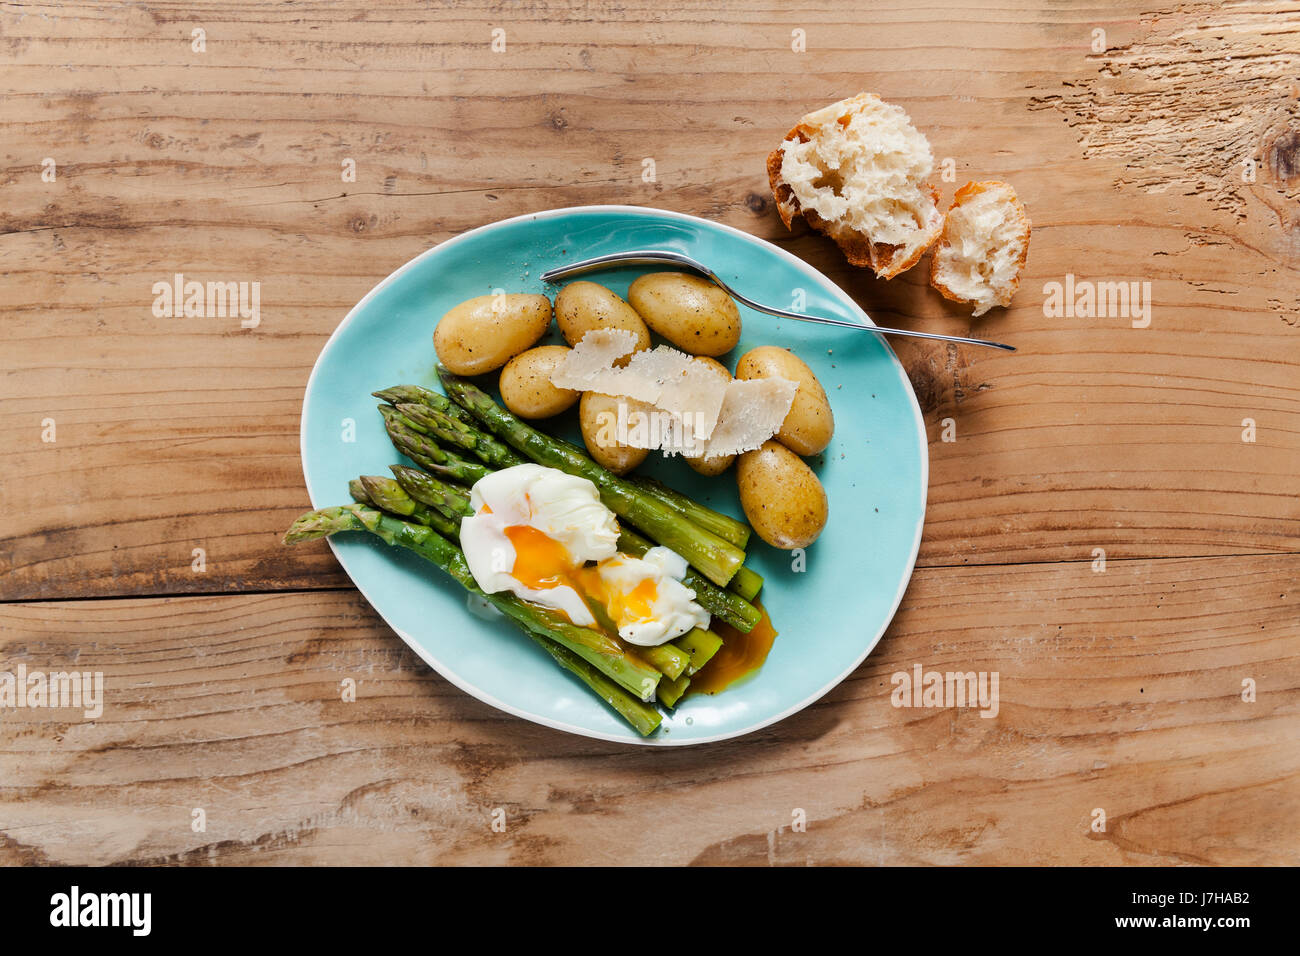 Light spring lunch on the plate. Fried asparagus, fresh potatoes and poached egg with parmesan cheese. healthy food. Stock Photo